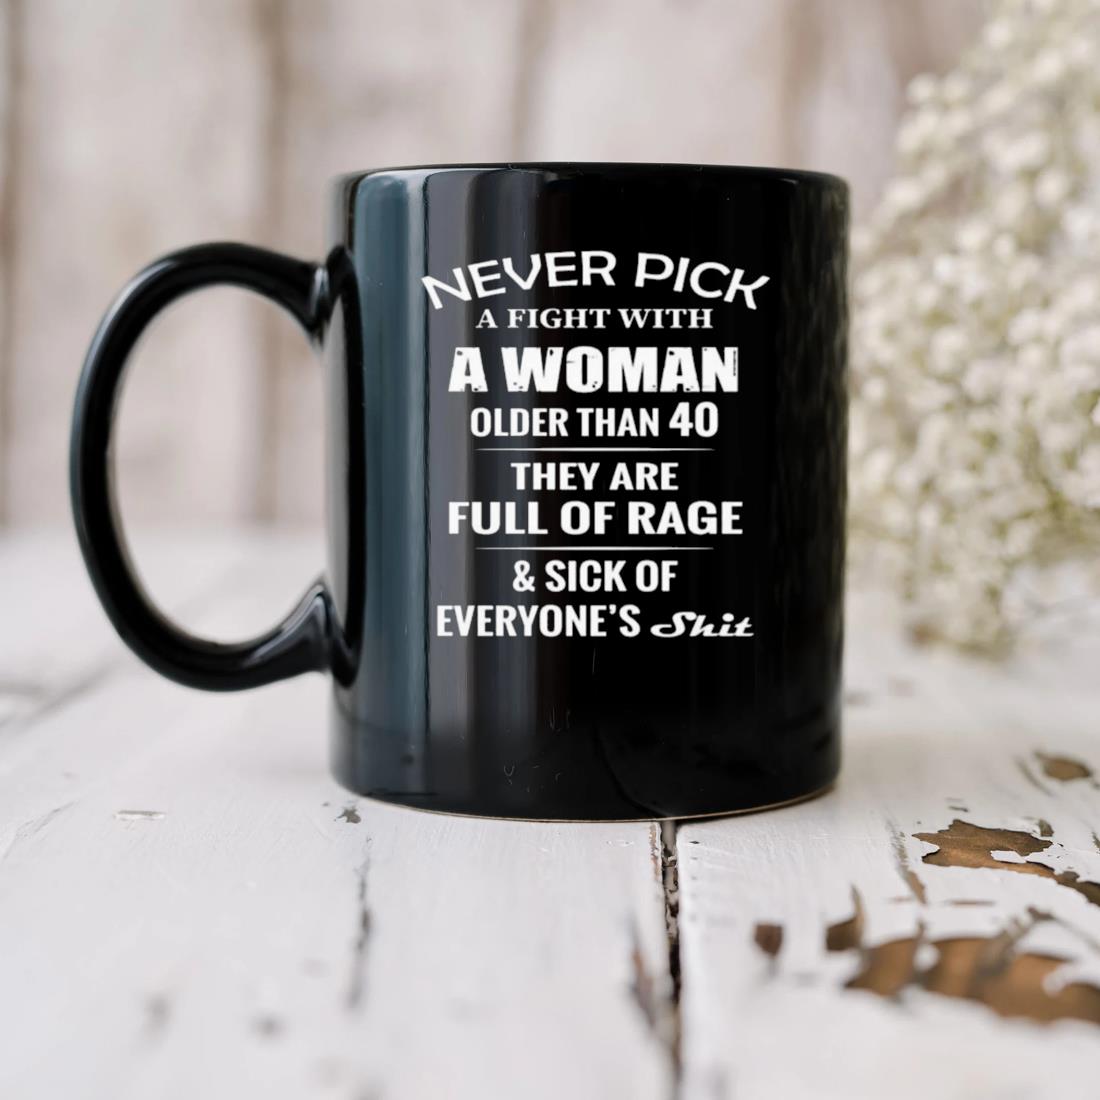 Never Pick A Fight With A Woman Older Than 40 They Are Full Of Rage And Sick Of Everyone's Shit Mug